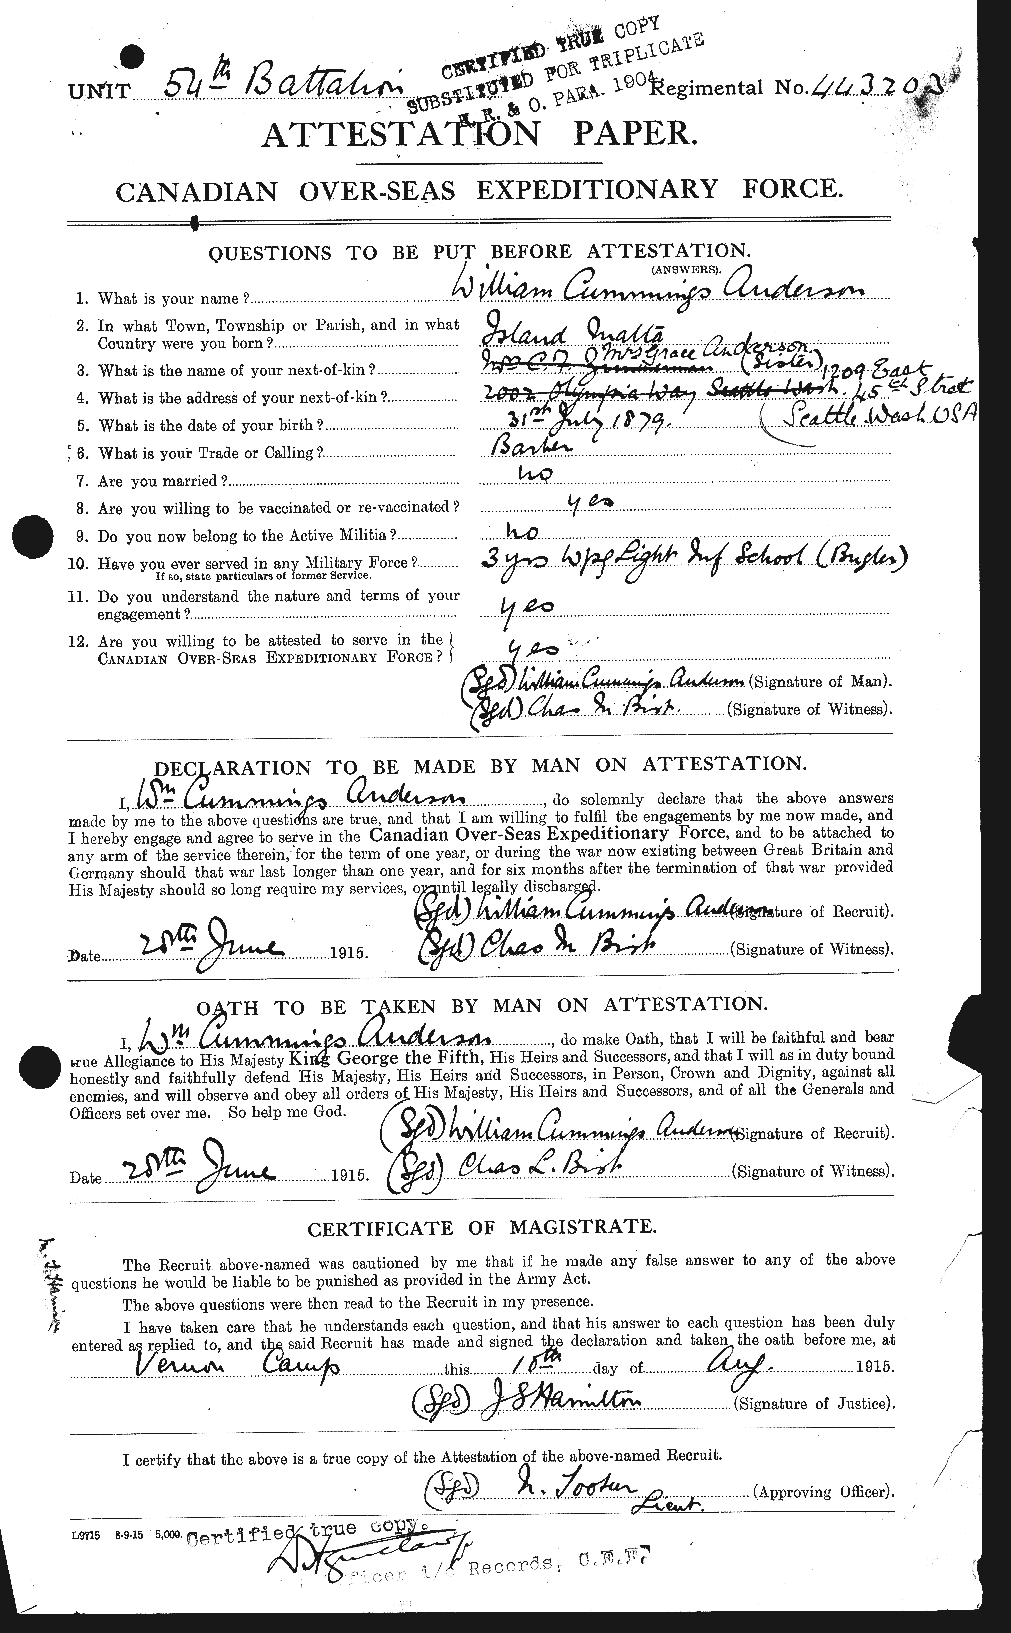 Personnel Records of the First World War - CEF 210730a